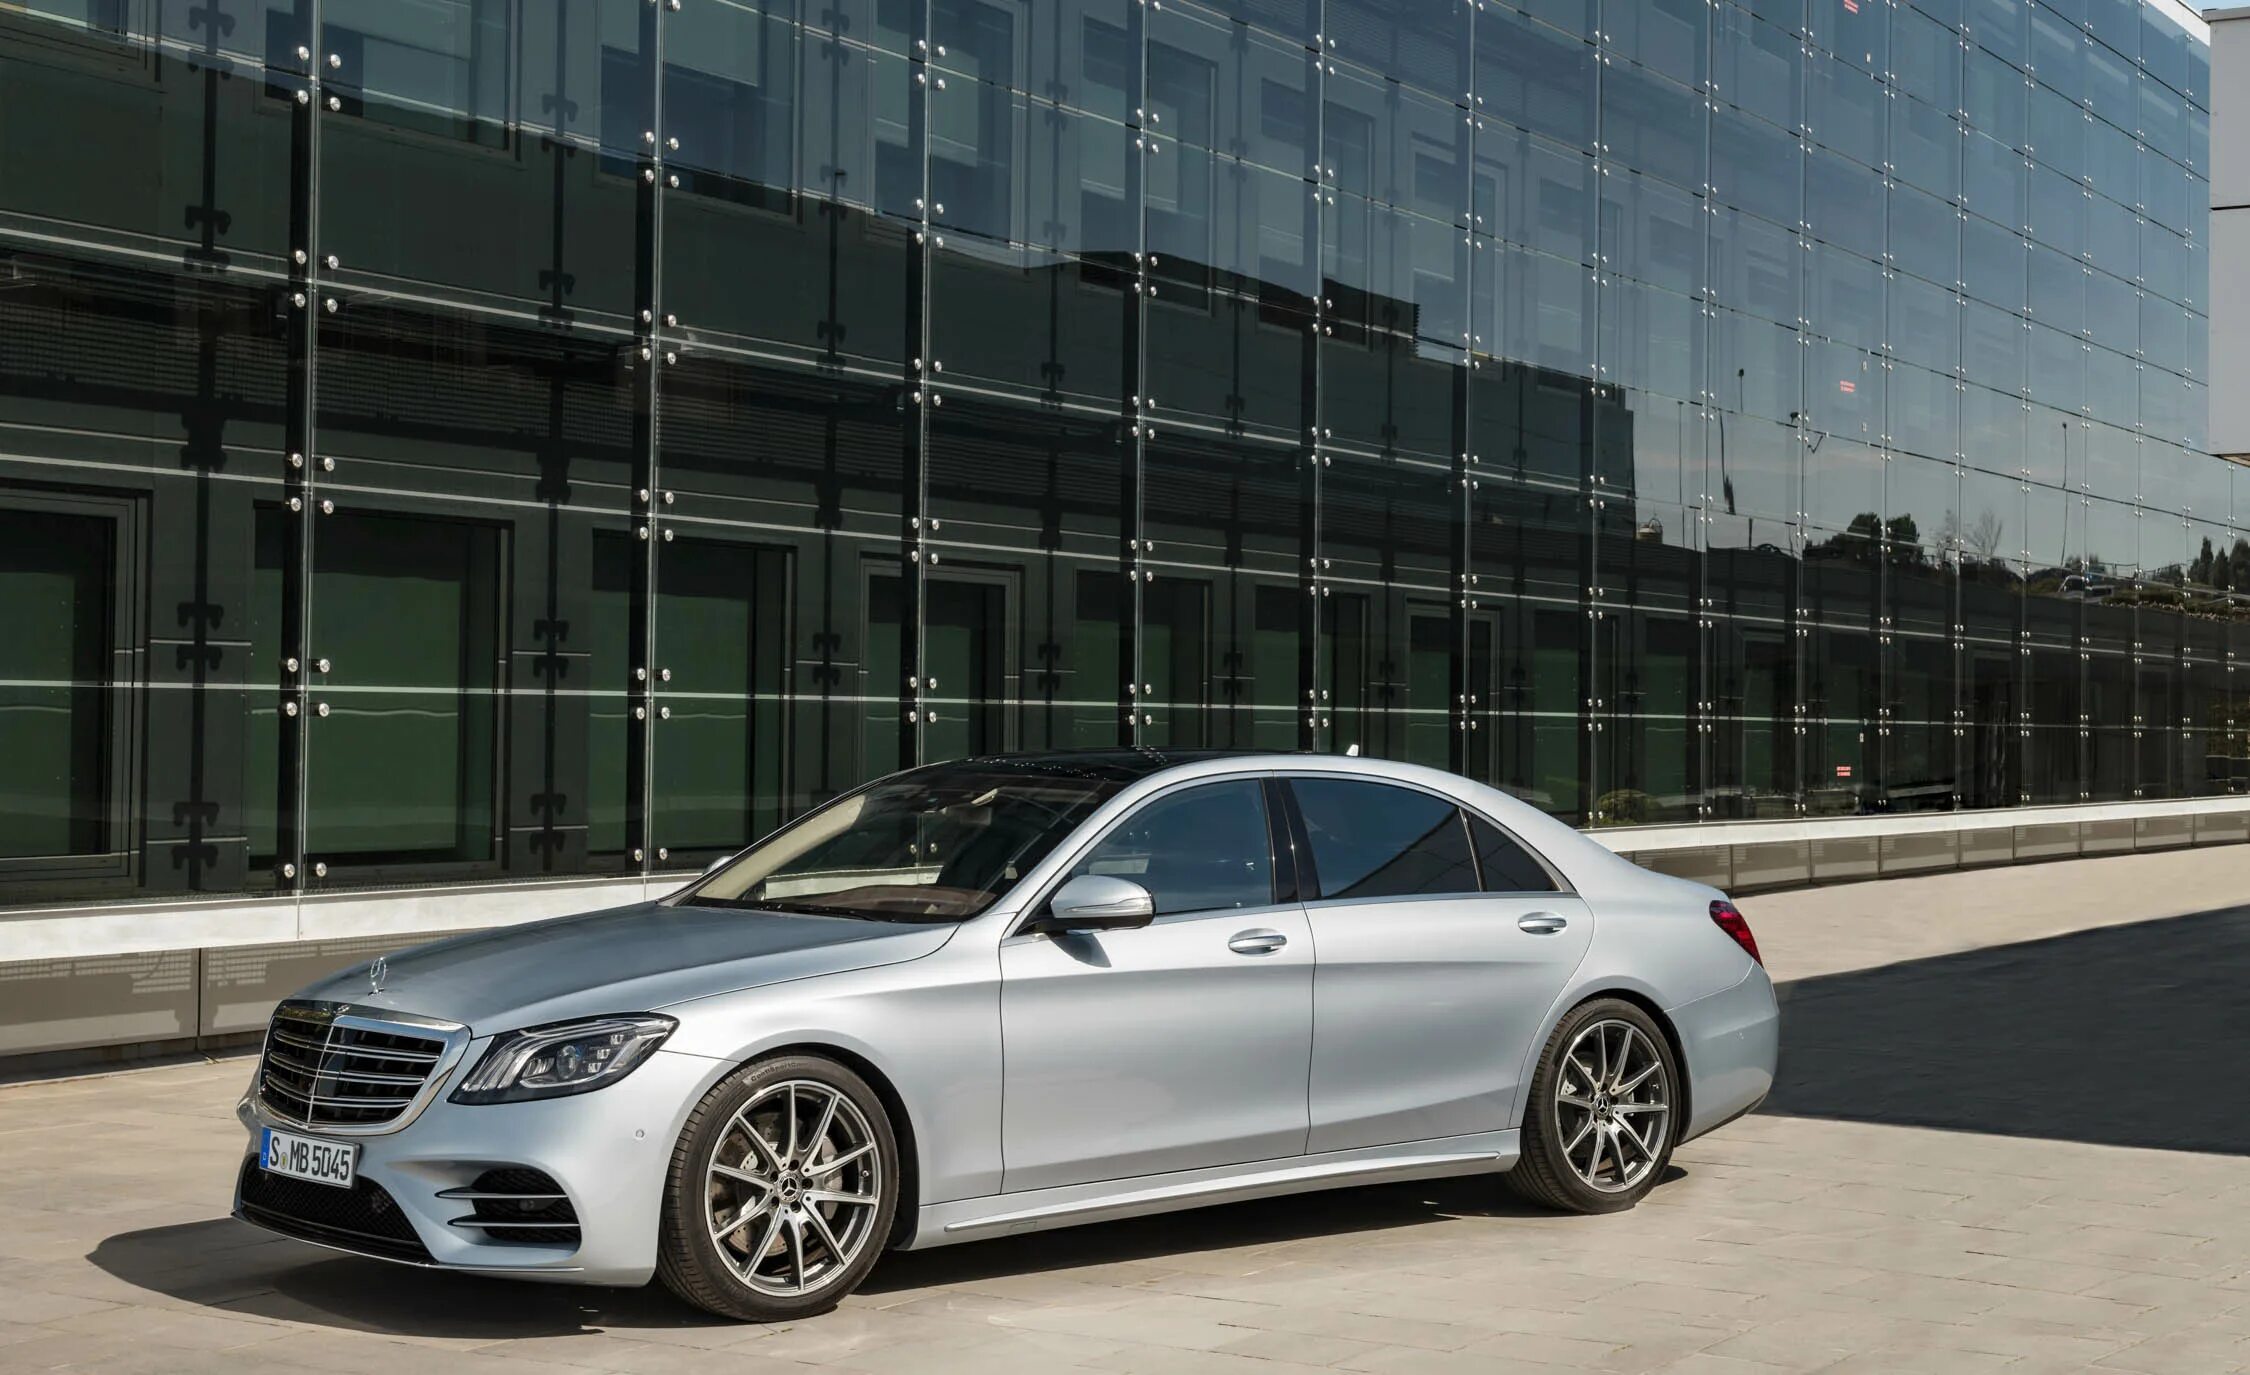 Мерседес Бенц s560. Mercedes-Benz s560 4matic. Мерседес s-класс s560 w222. Mercedes Benz s class w222.